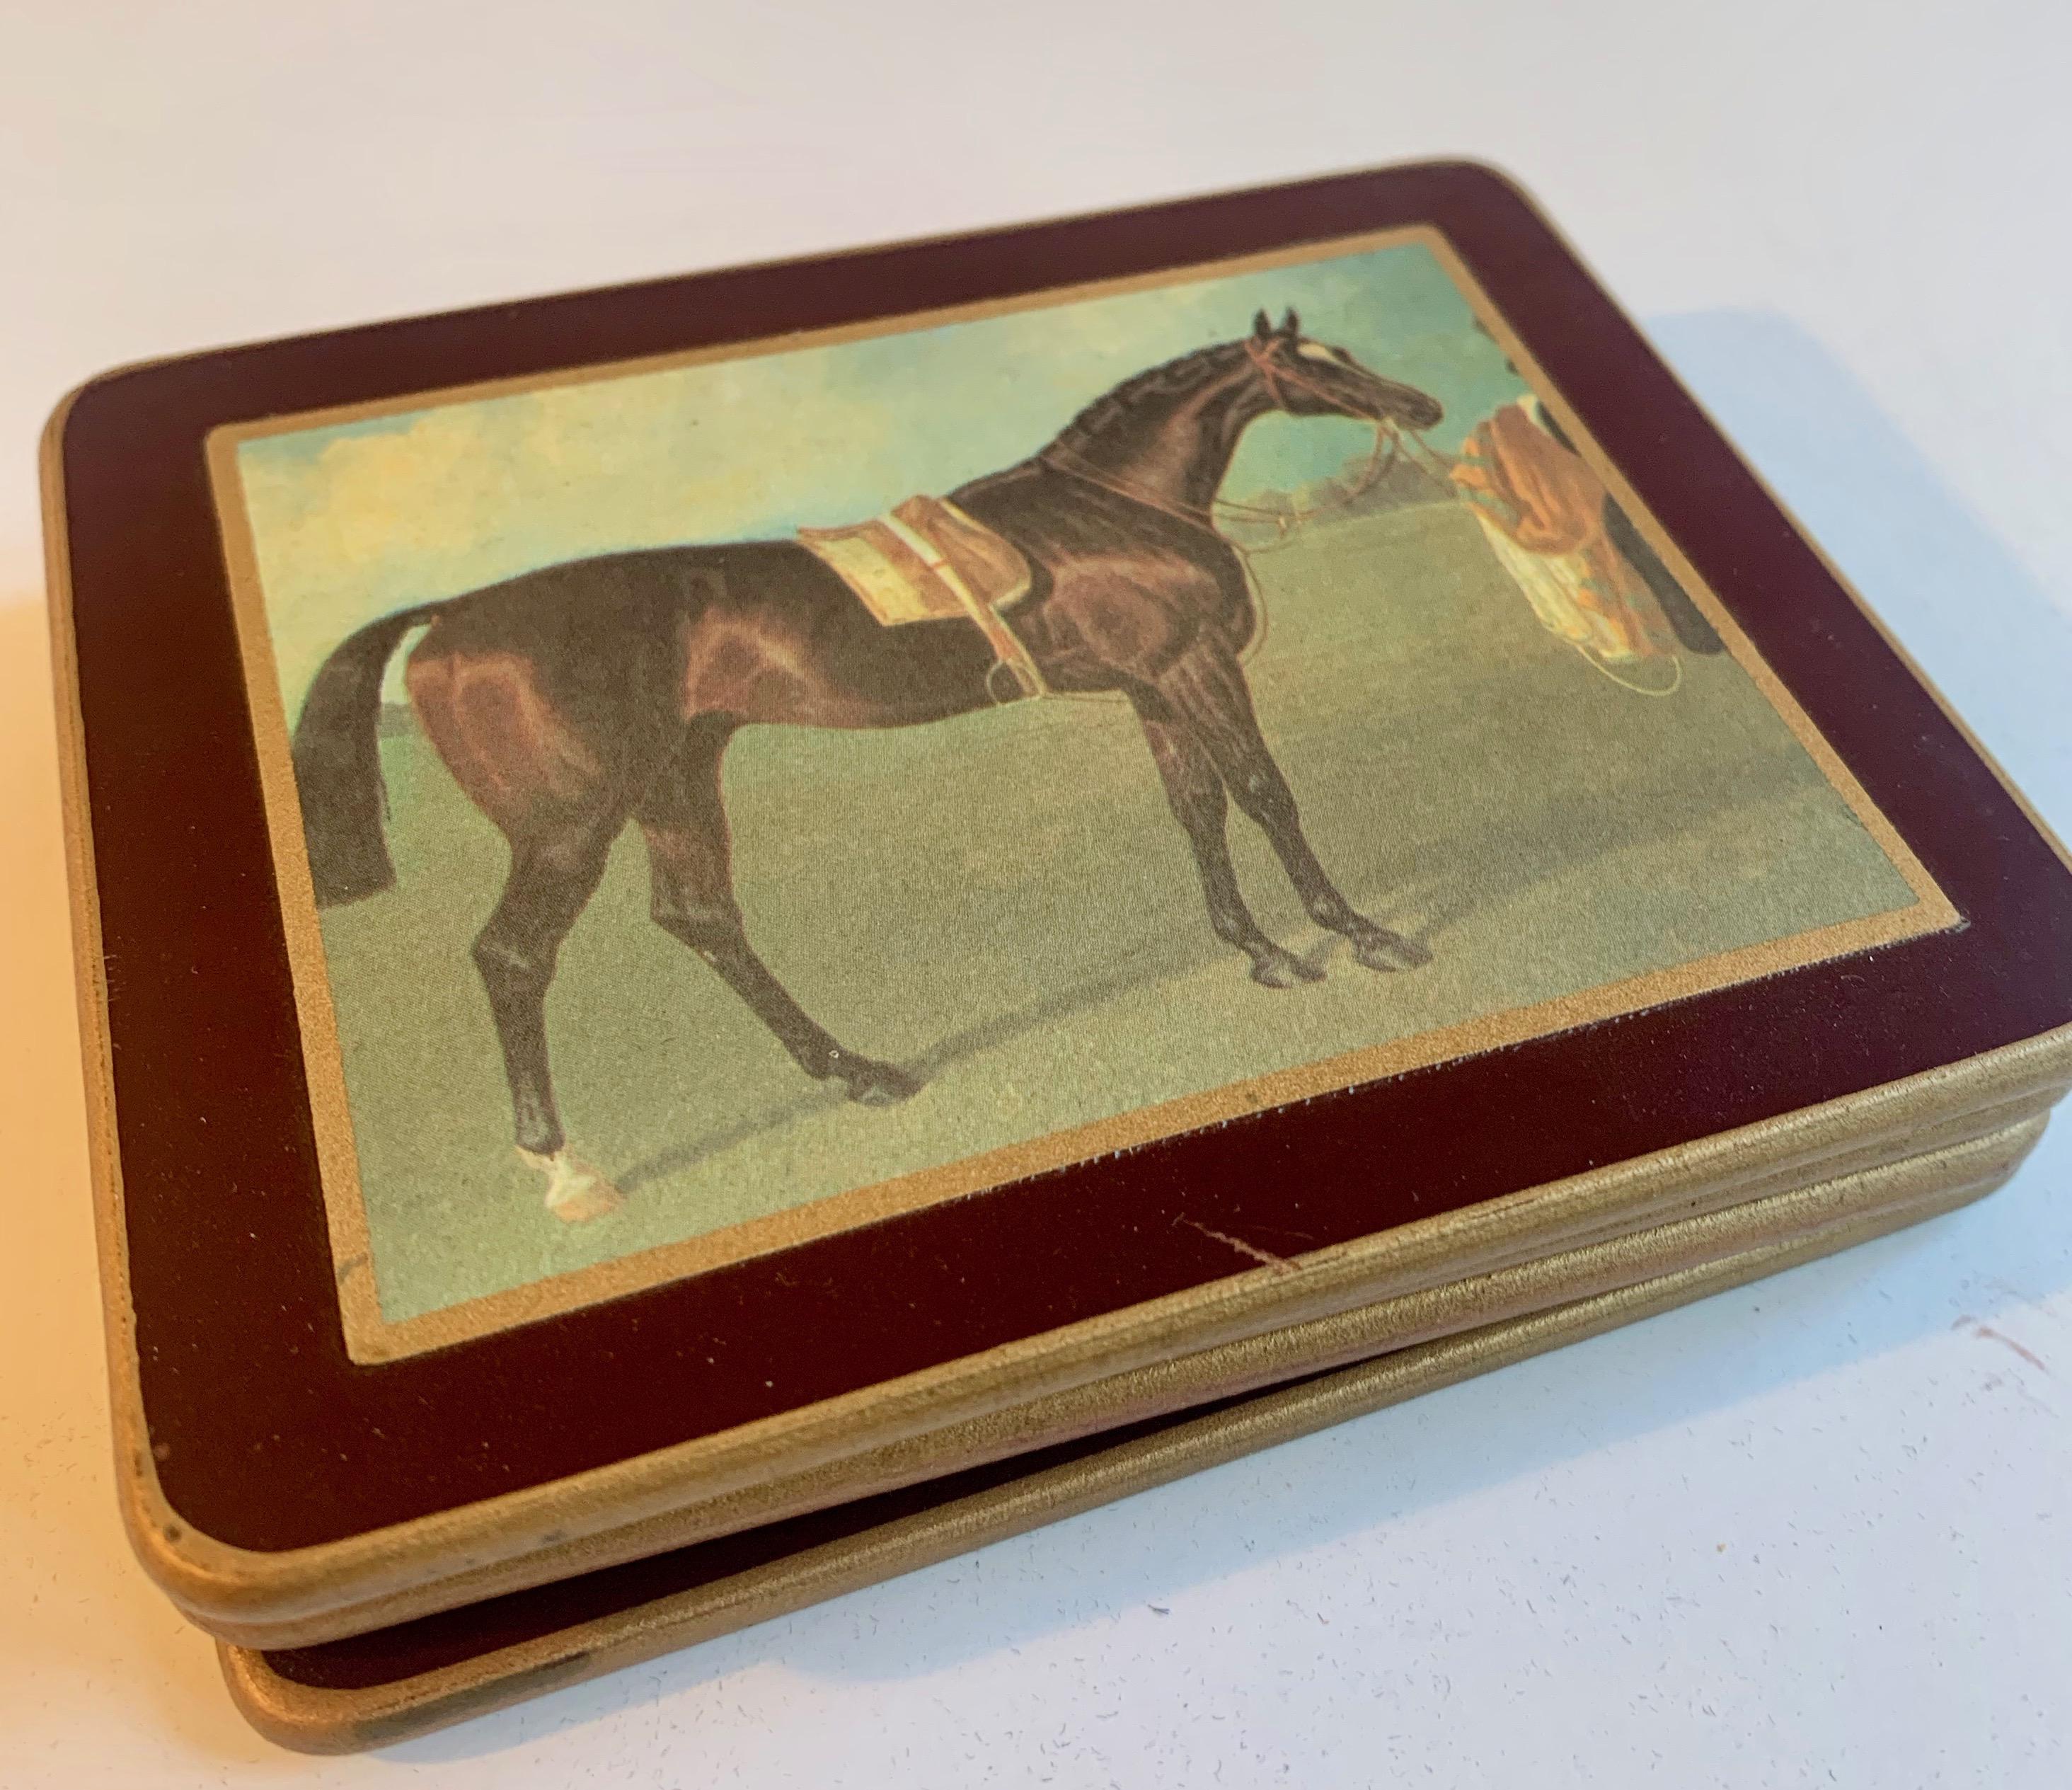 Set of Four Horse Coasters, made in England and very thick and wonderful addition to any bar, especially those with an equestrian or Ralph Lauren Style.